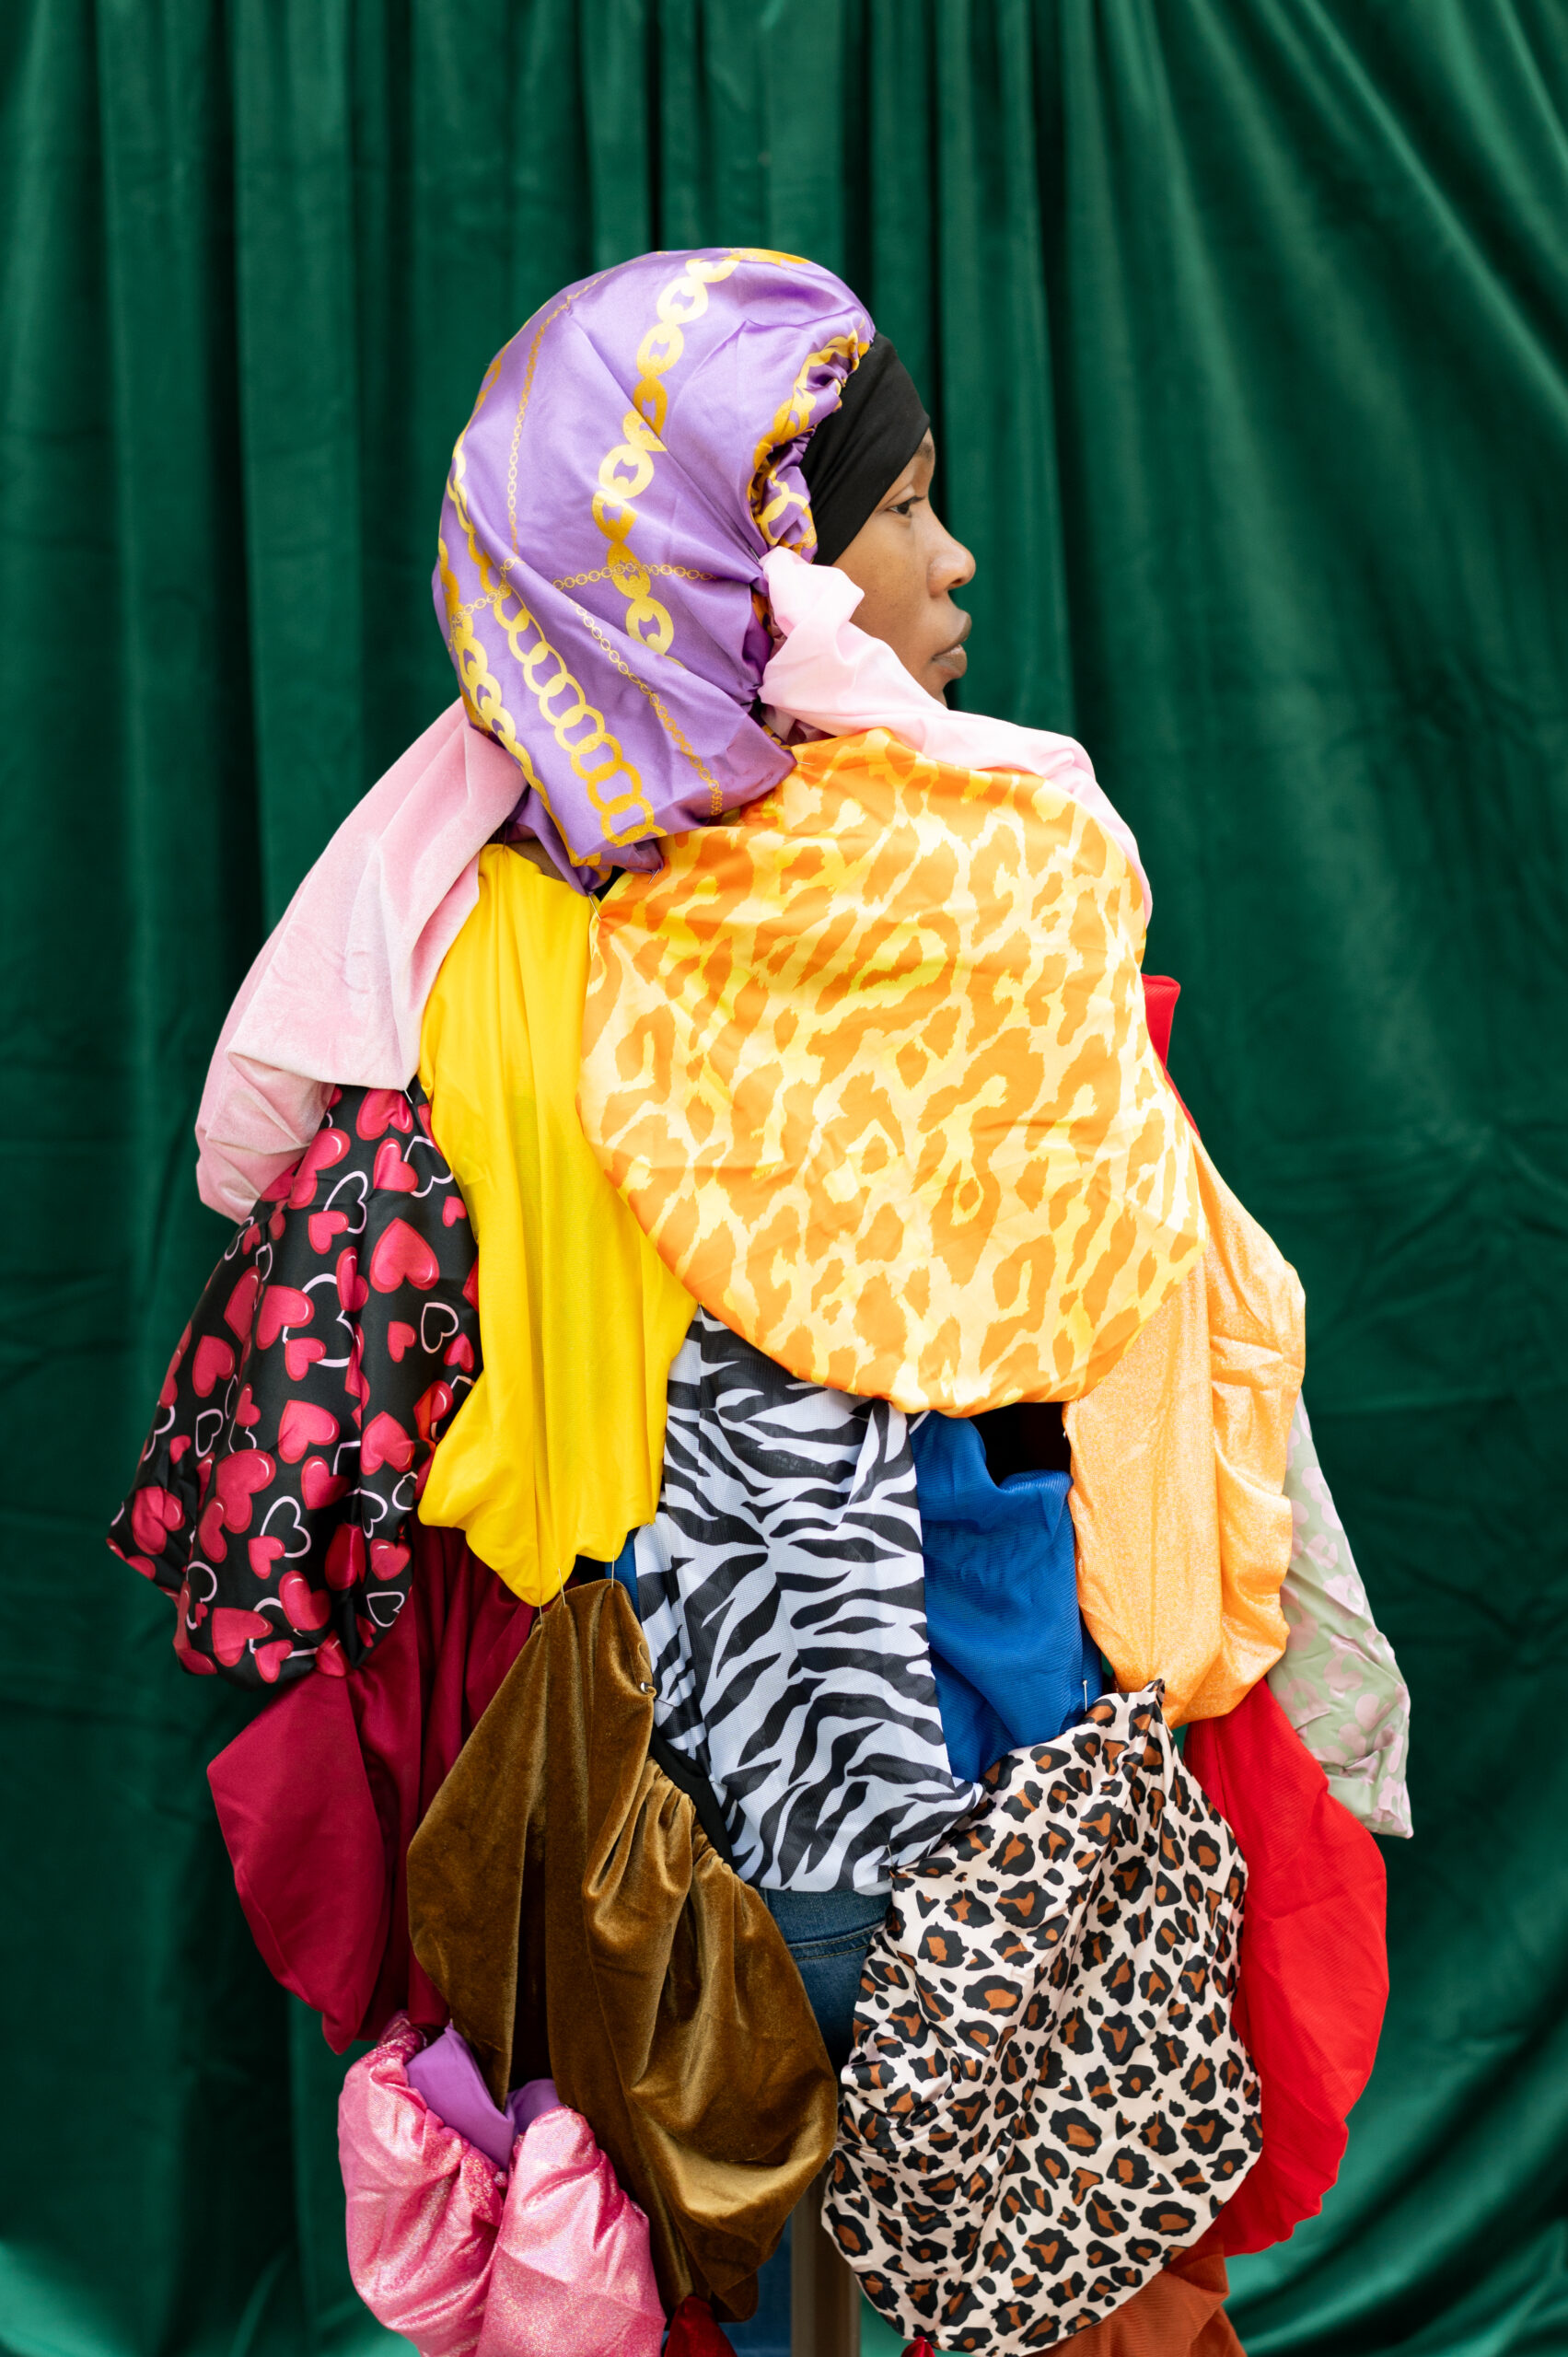 A Black woman stands in profile, her full-body length locks covered in an elaborate wrap made from multiple, colorful patterned soft looking fabrics.